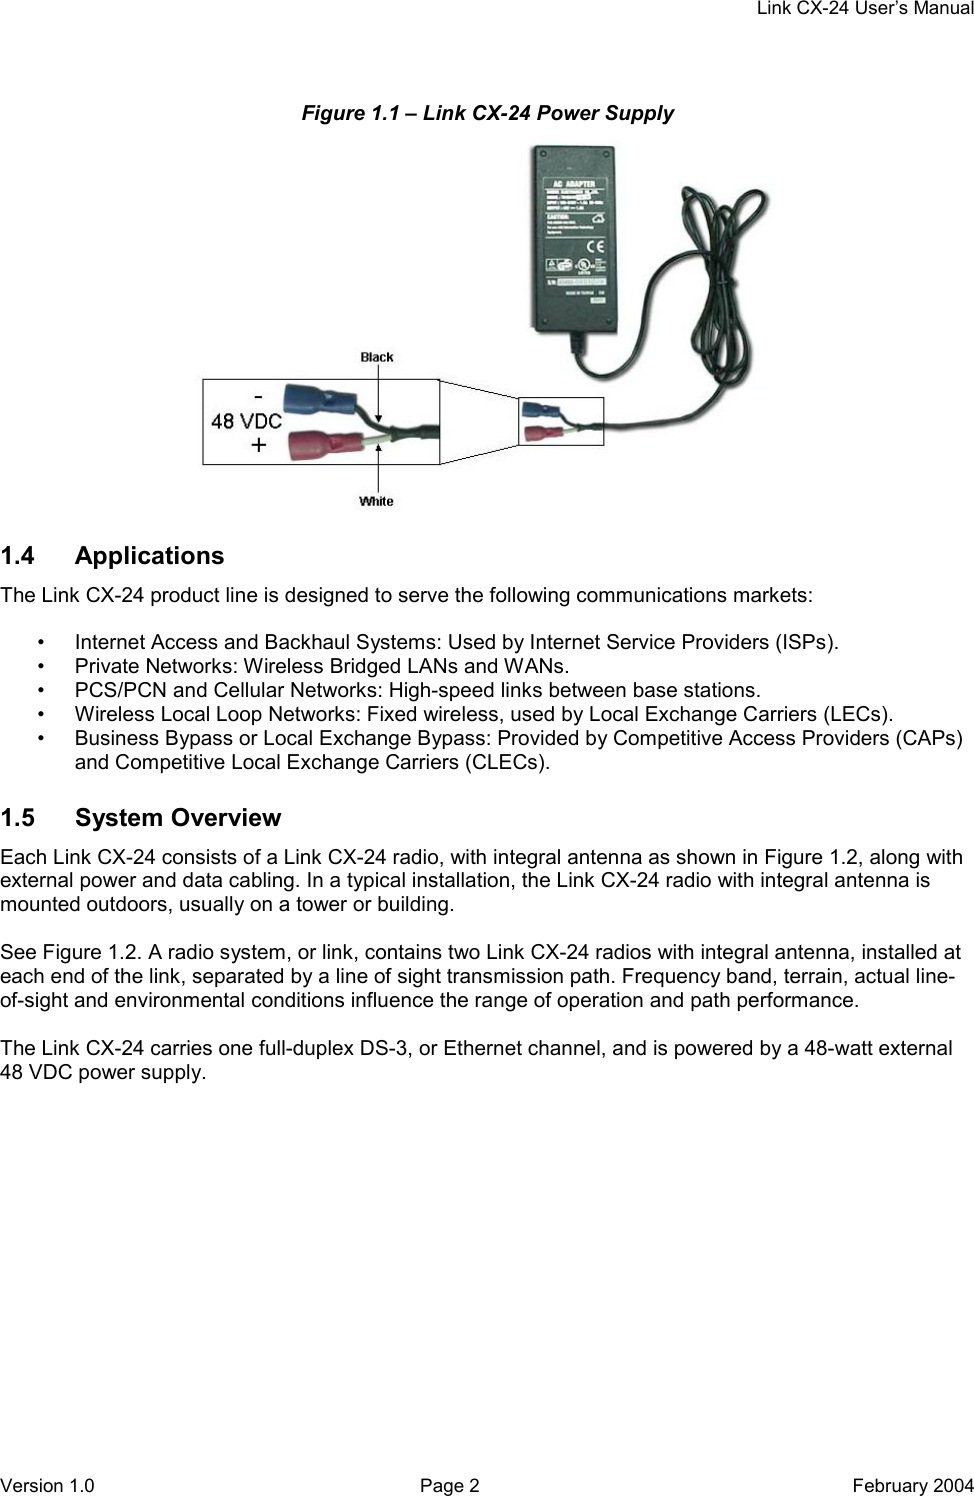     Link CX-24 User’s Manual Version 1.0  Page 2  February 2004 Figure 1.1 – Link CX-24 Power Supply  1.4 Applications The Link CX-24 product line is designed to serve the following communications markets:  •  Internet Access and Backhaul Systems: Used by Internet Service Providers (ISPs). •  Private Networks: Wireless Bridged LANs and WANs. •  PCS/PCN and Cellular Networks: High-speed links between base stations. •  Wireless Local Loop Networks: Fixed wireless, used by Local Exchange Carriers (LECs). •  Business Bypass or Local Exchange Bypass: Provided by Competitive Access Providers (CAPs) and Competitive Local Exchange Carriers (CLECs). 1.5 System Overview Each Link CX-24 consists of a Link CX-24 radio, with integral antenna as shown in Figure 1.2, along with external power and data cabling. In a typical installation, the Link CX-24 radio with integral antenna is mounted outdoors, usually on a tower or building.  See Figure 1.2. A radio system, or link, contains two Link CX-24 radios with integral antenna, installed at each end of the link, separated by a line of sight transmission path. Frequency band, terrain, actual line-of-sight and environmental conditions influence the range of operation and path performance.  The Link CX-24 carries one full-duplex DS-3, or Ethernet channel, and is powered by a 48-watt external 48 VDC power supply. 